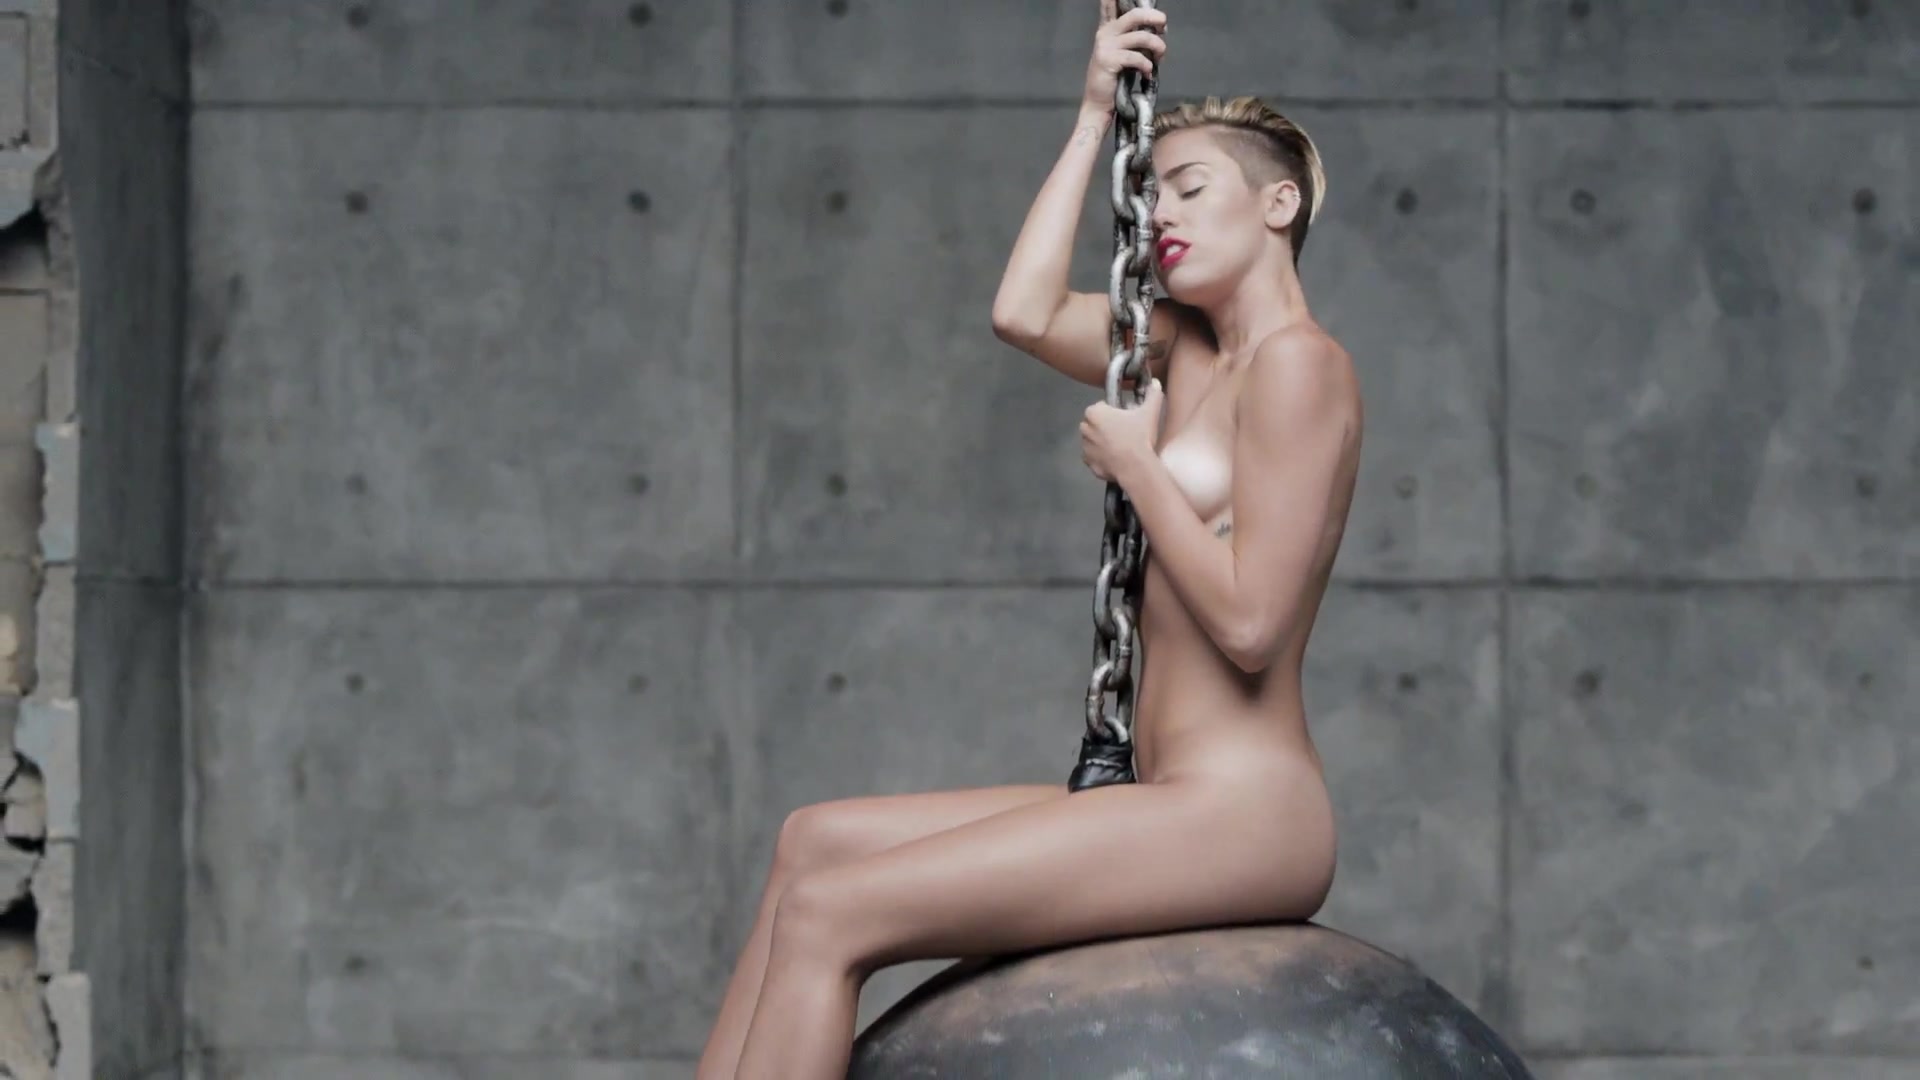 Miley Cyrus Wrecking Ball Music Video